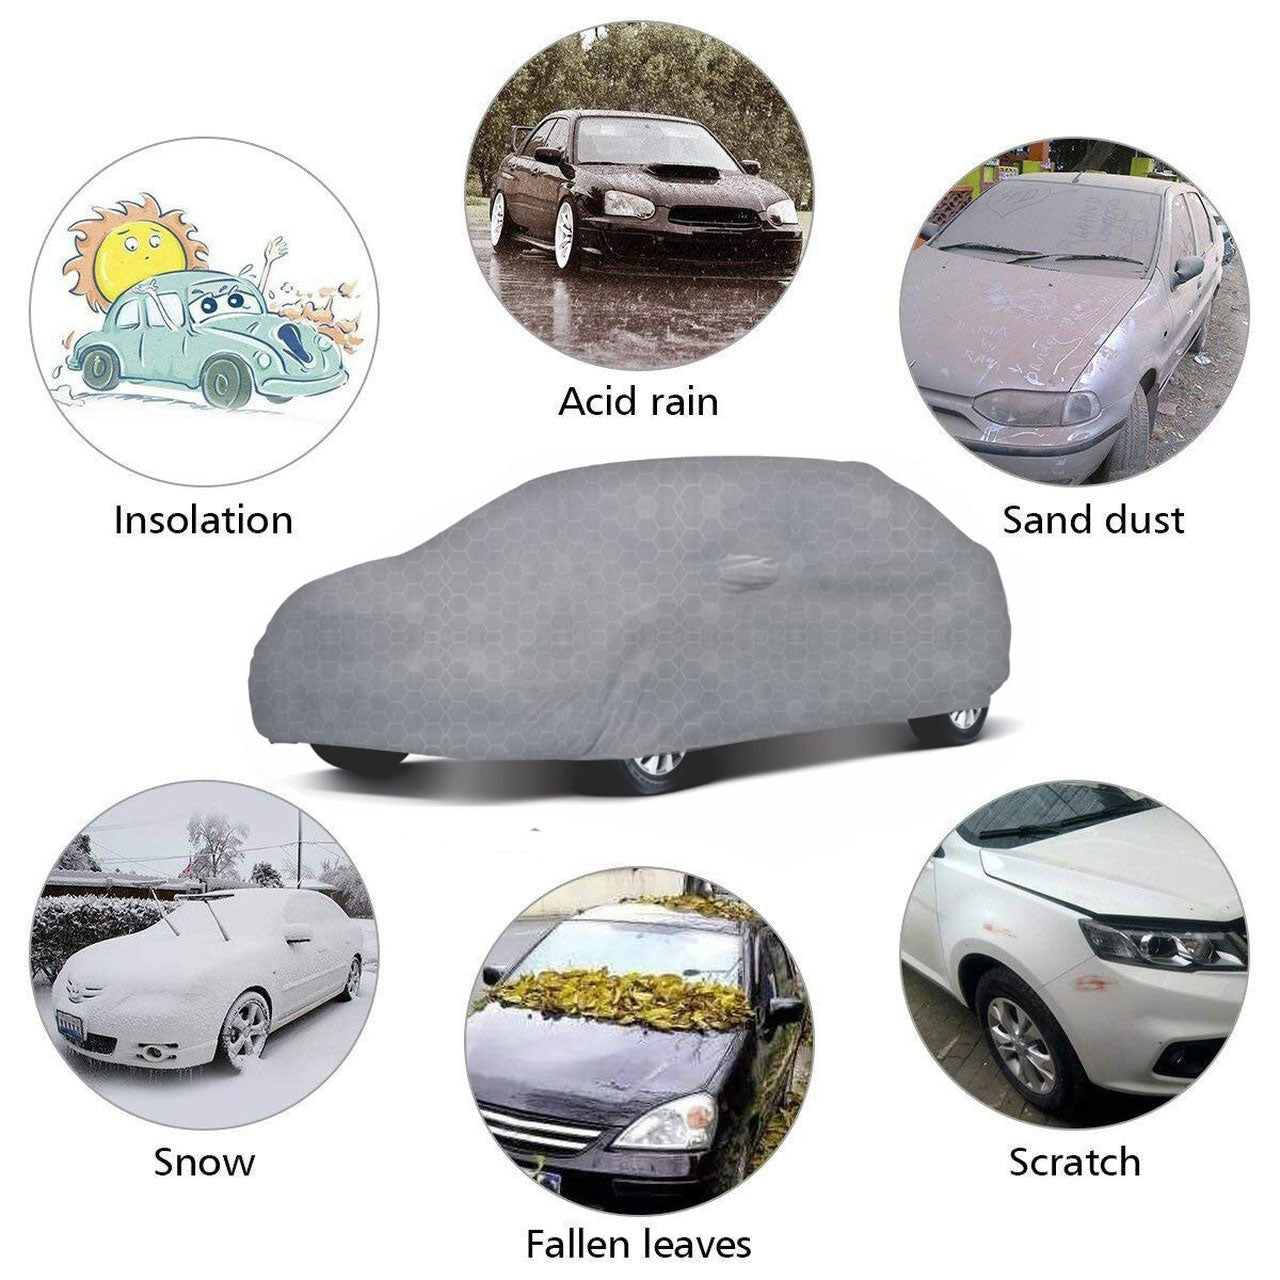 Oshotto 100% Dust Proof, Water Resistant Grey Car Body Cover with Mirror Pocket For Range Rover Evoque